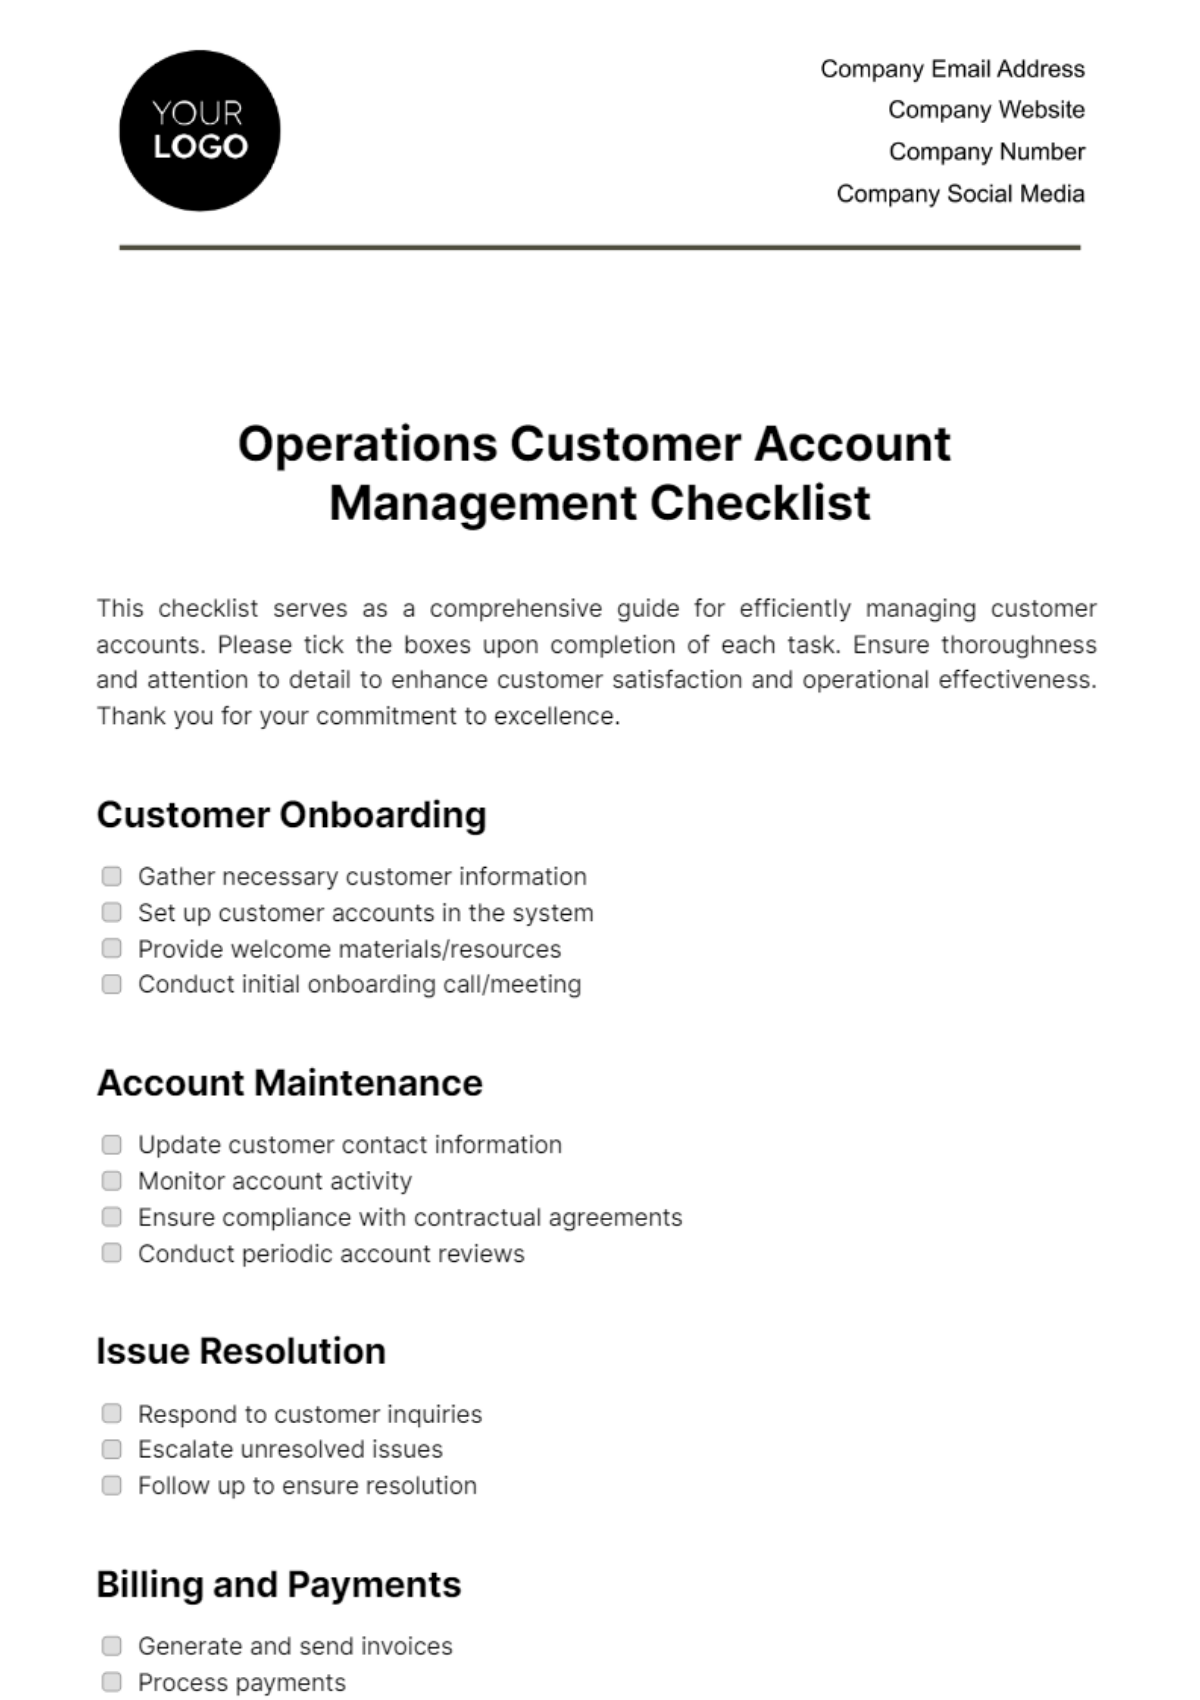 Operations Customer Account Management Checklist Template